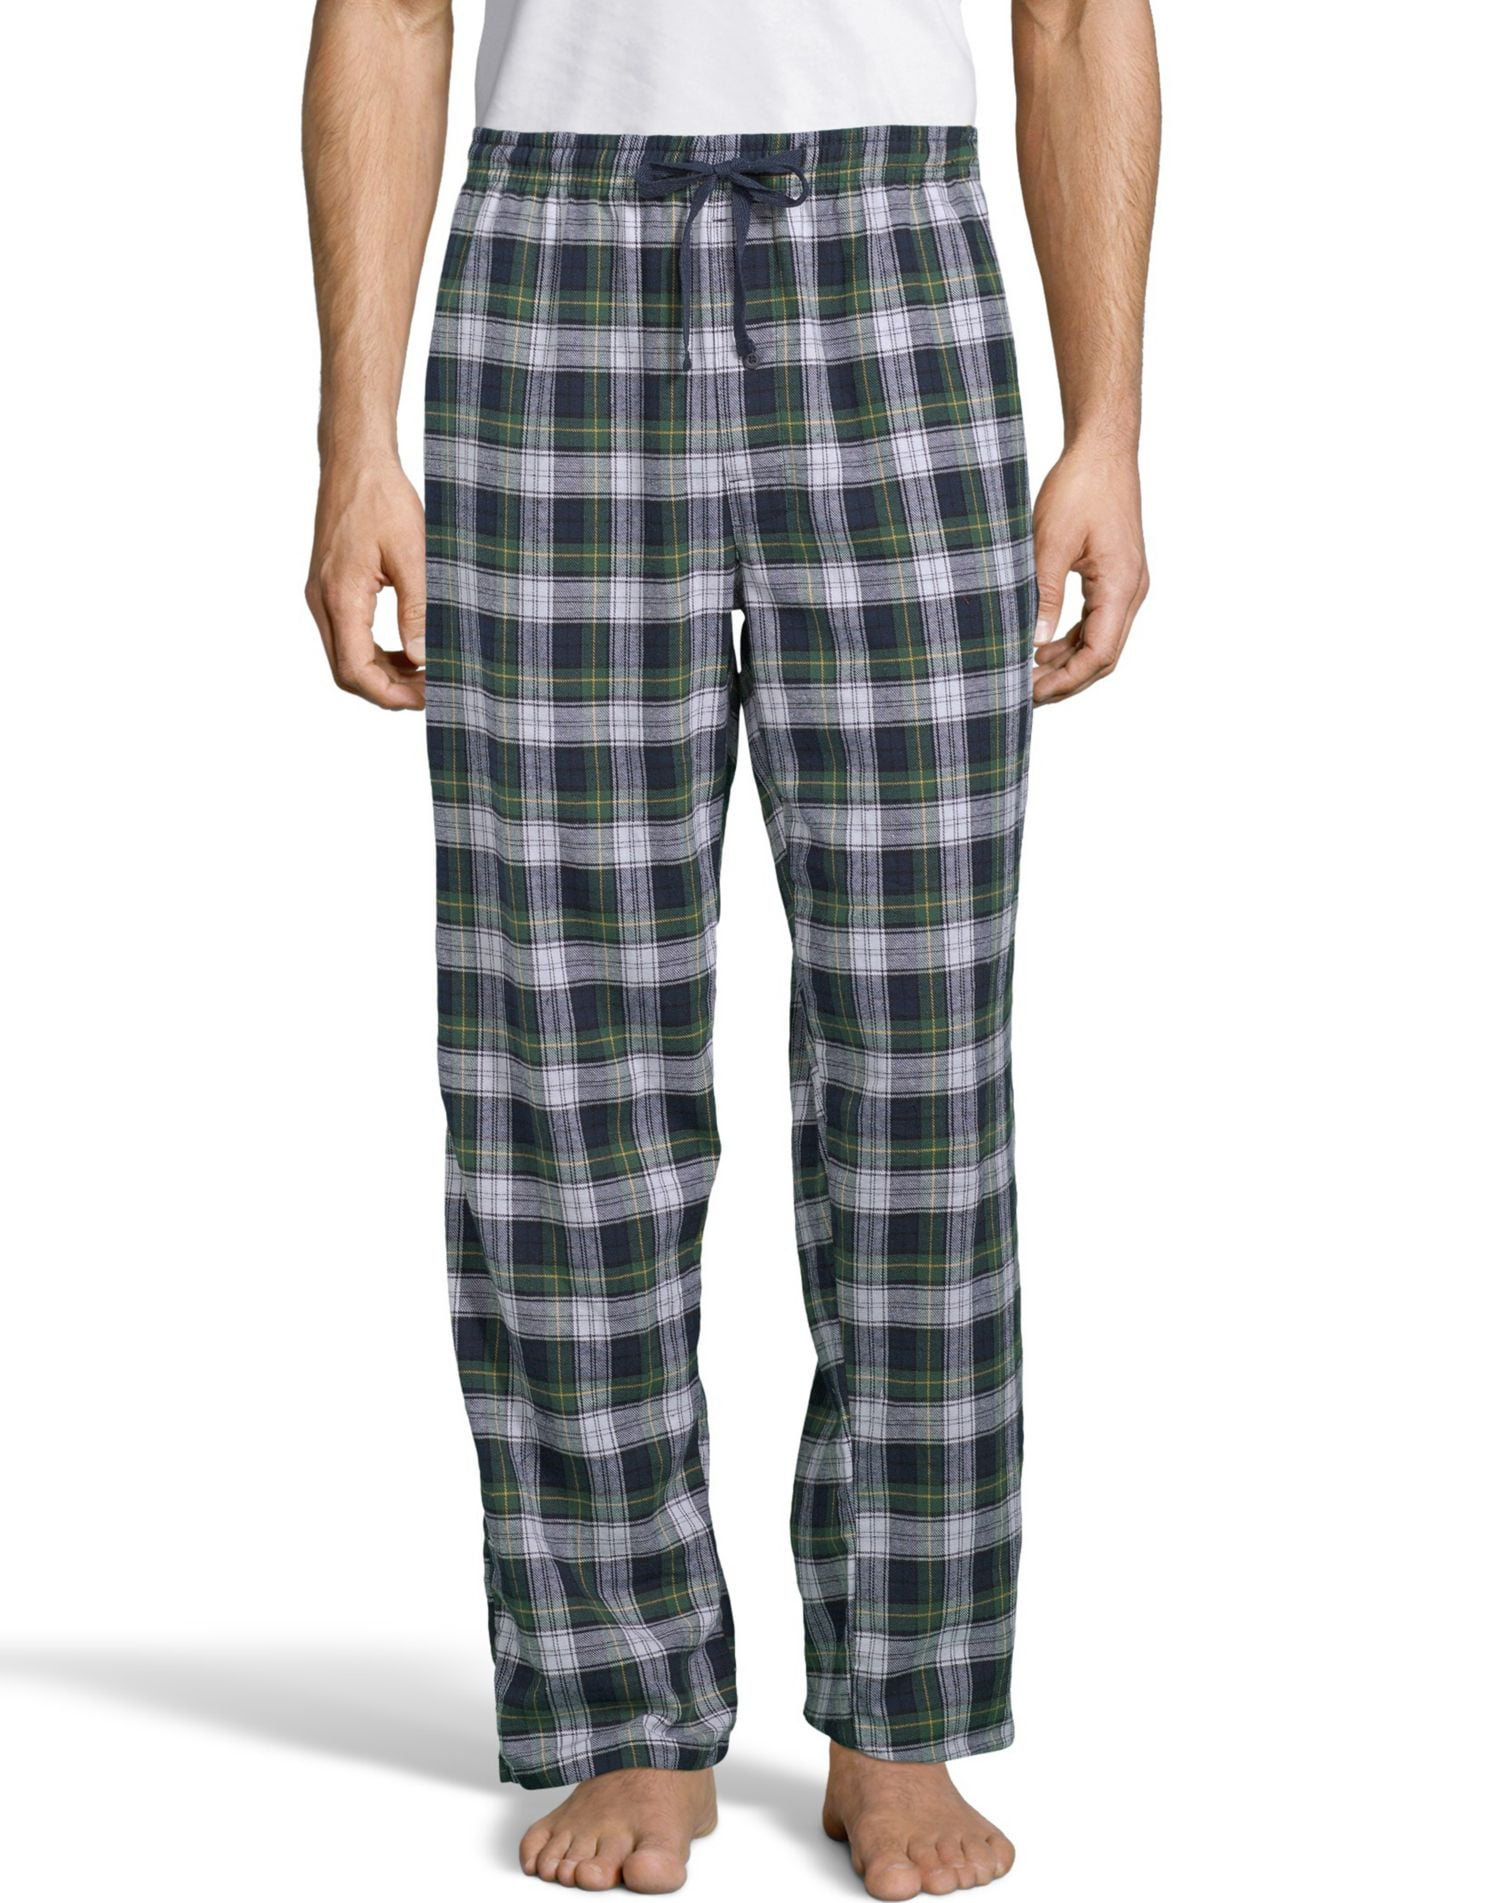 Hanes - Hanes Mens Flannel Pants with Comfort Flex Waistband, S ...